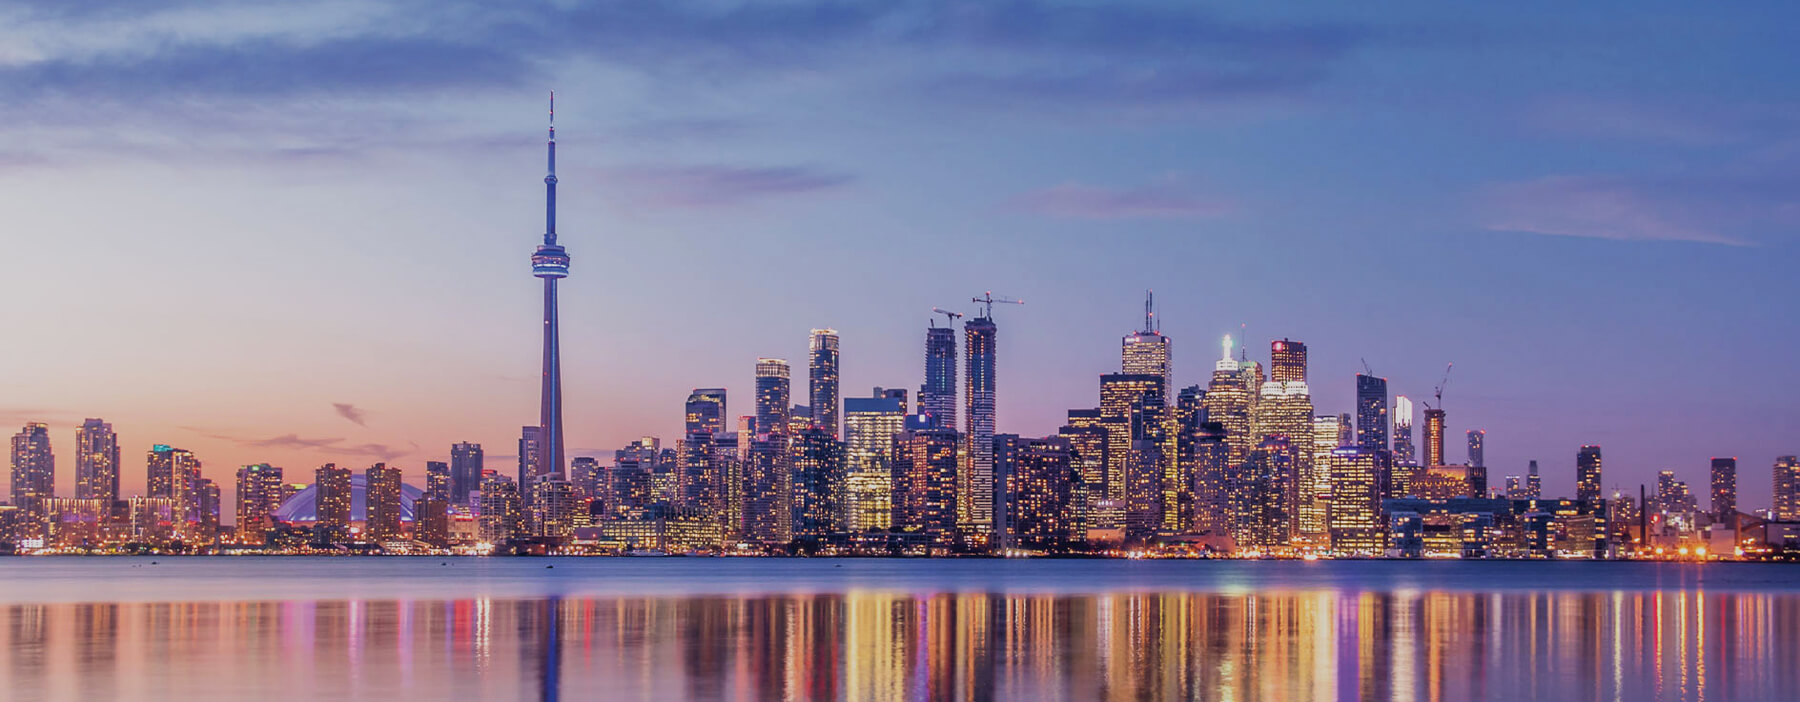 Jintai Immigration is a certified Canada immigration agency in Toronto. Our certified immigration consultants provide worry-free immigration services. Contact us now!